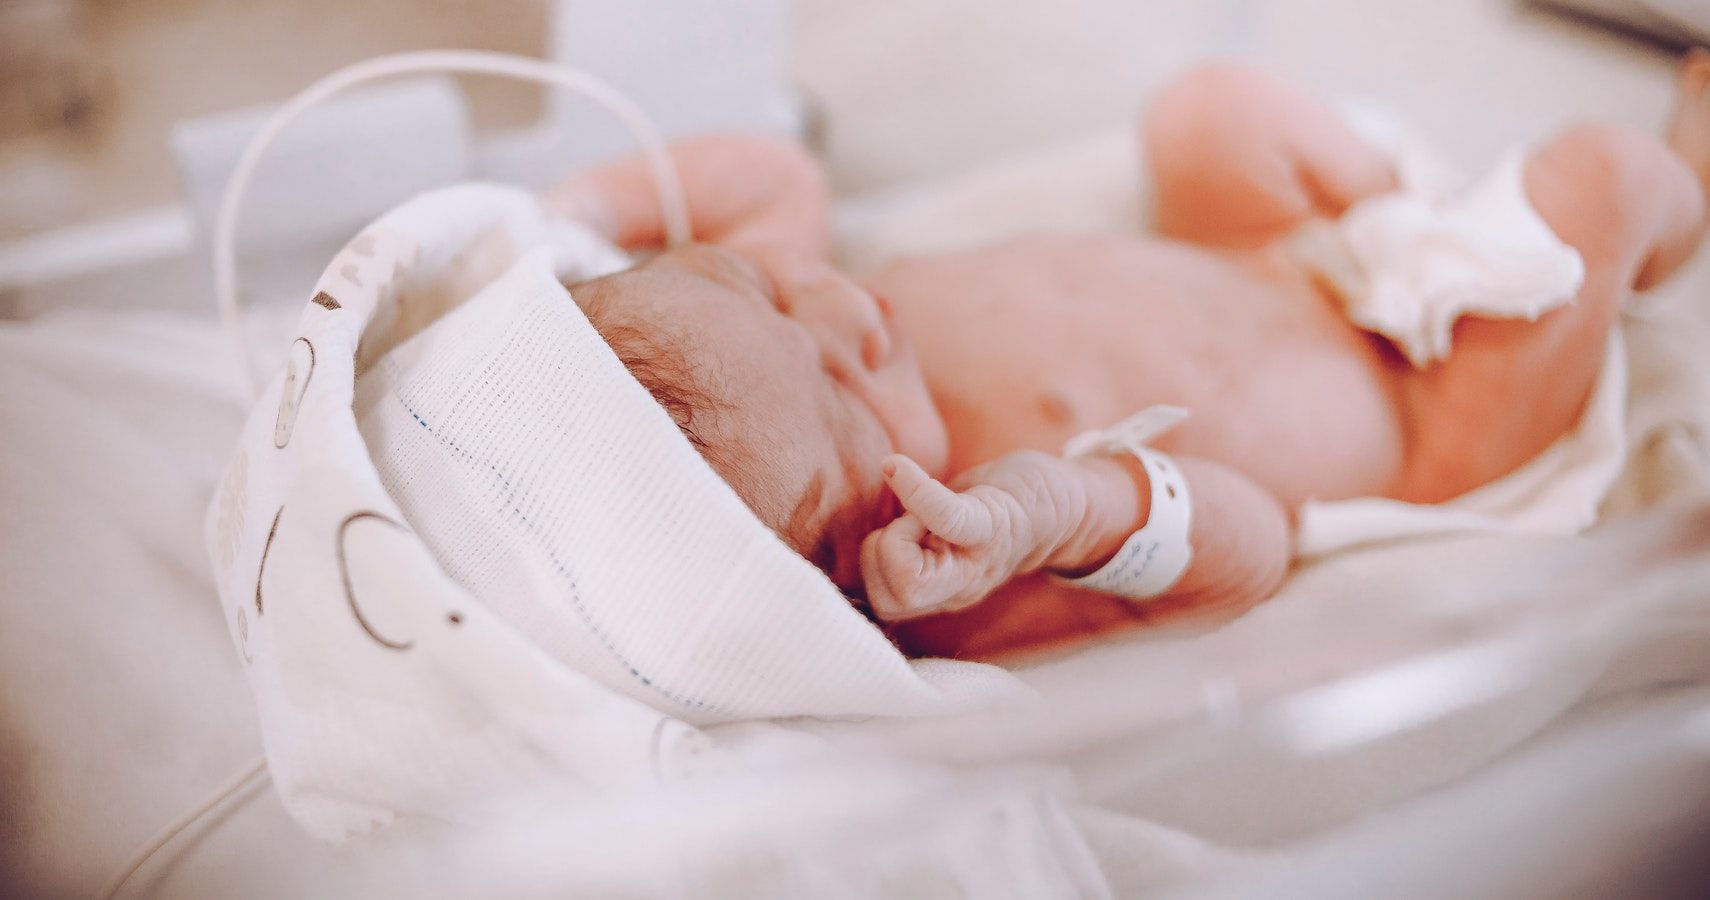 Treatment For C-Section Babies Who Miss Out On Mom's Microbes